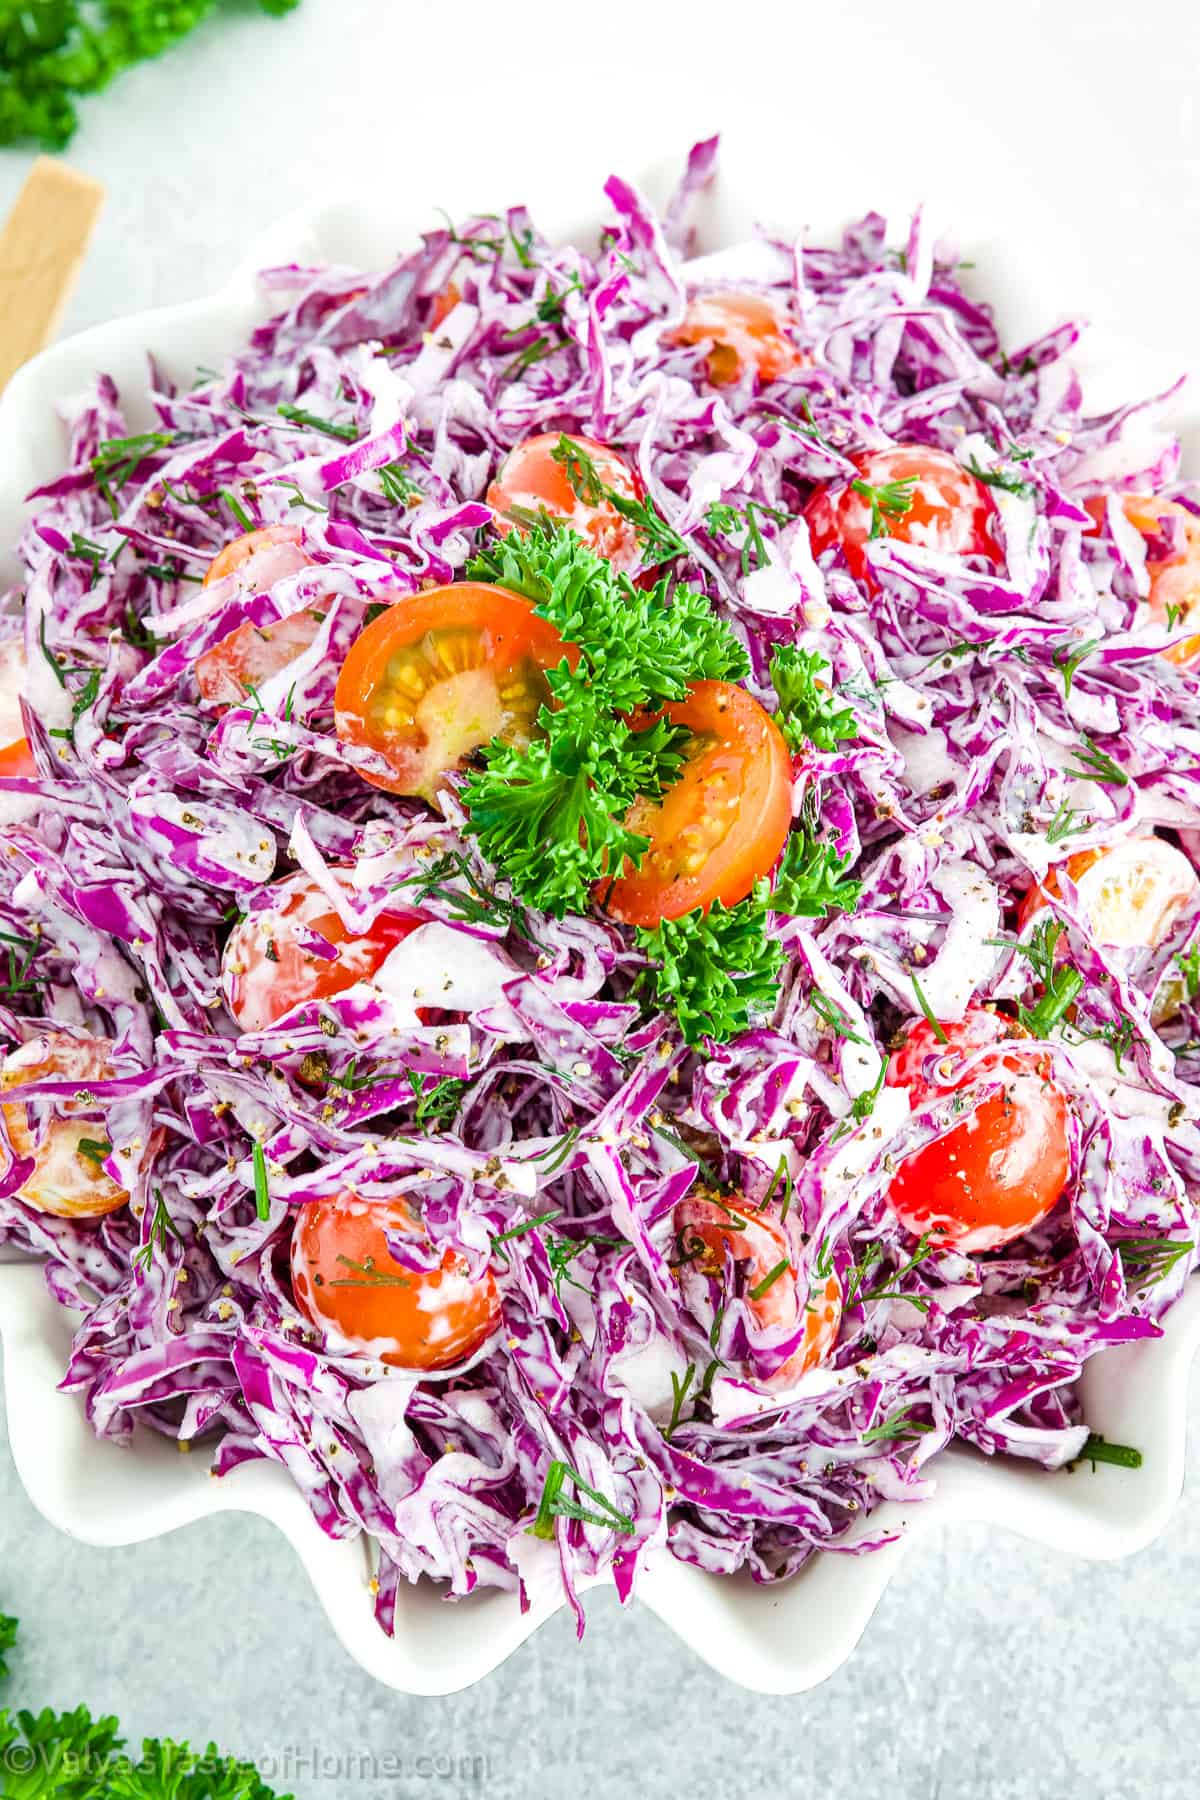 Purple cabbage salad is a colorful and flavorful dish that combines fresh ingredients with a homemade dressing for an irresistible combination.